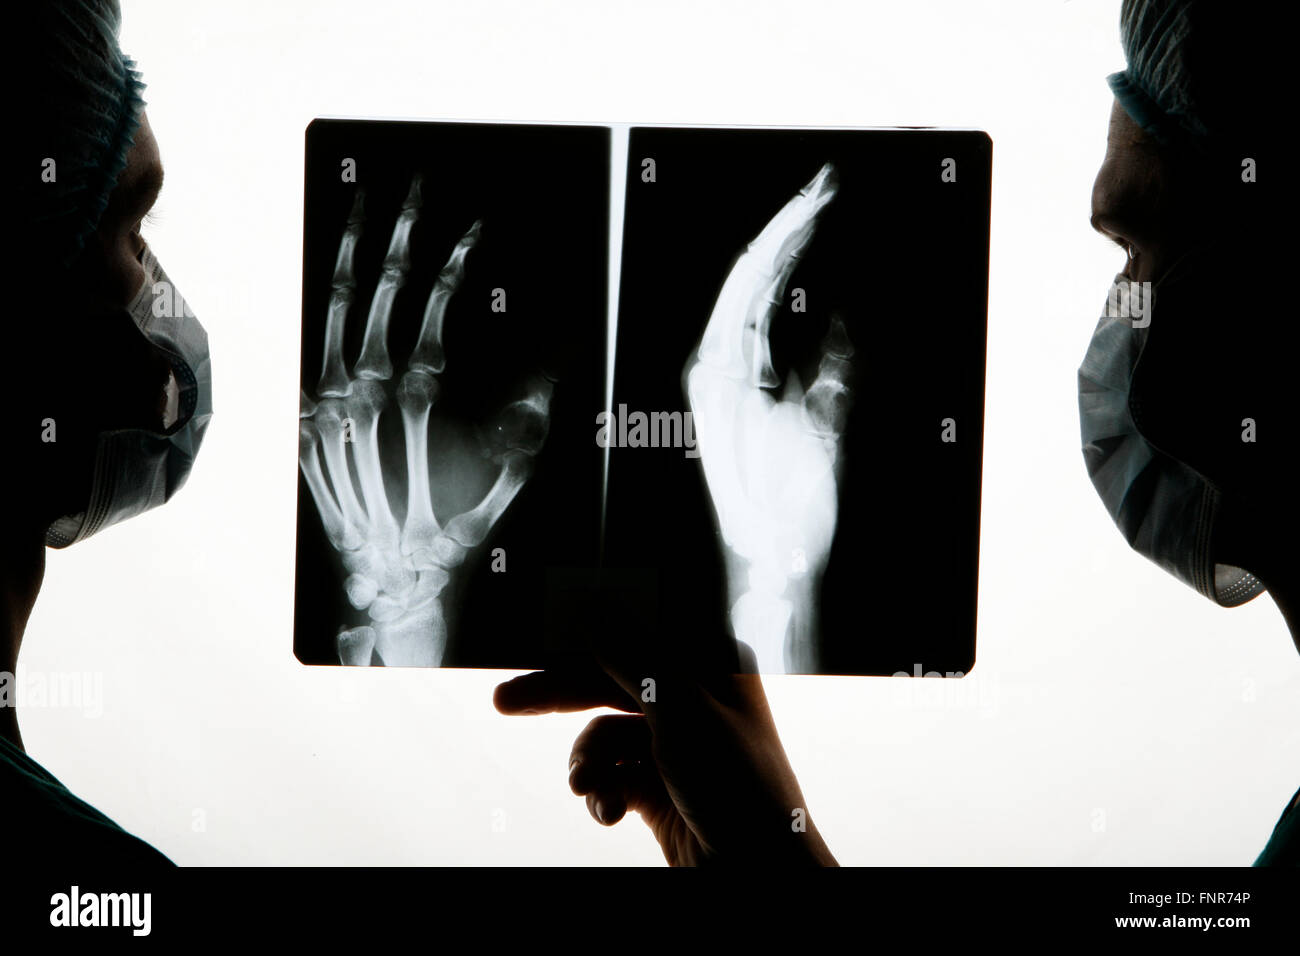 Two surgeons examine an x-ray of a hand before surgery. Stock Photo